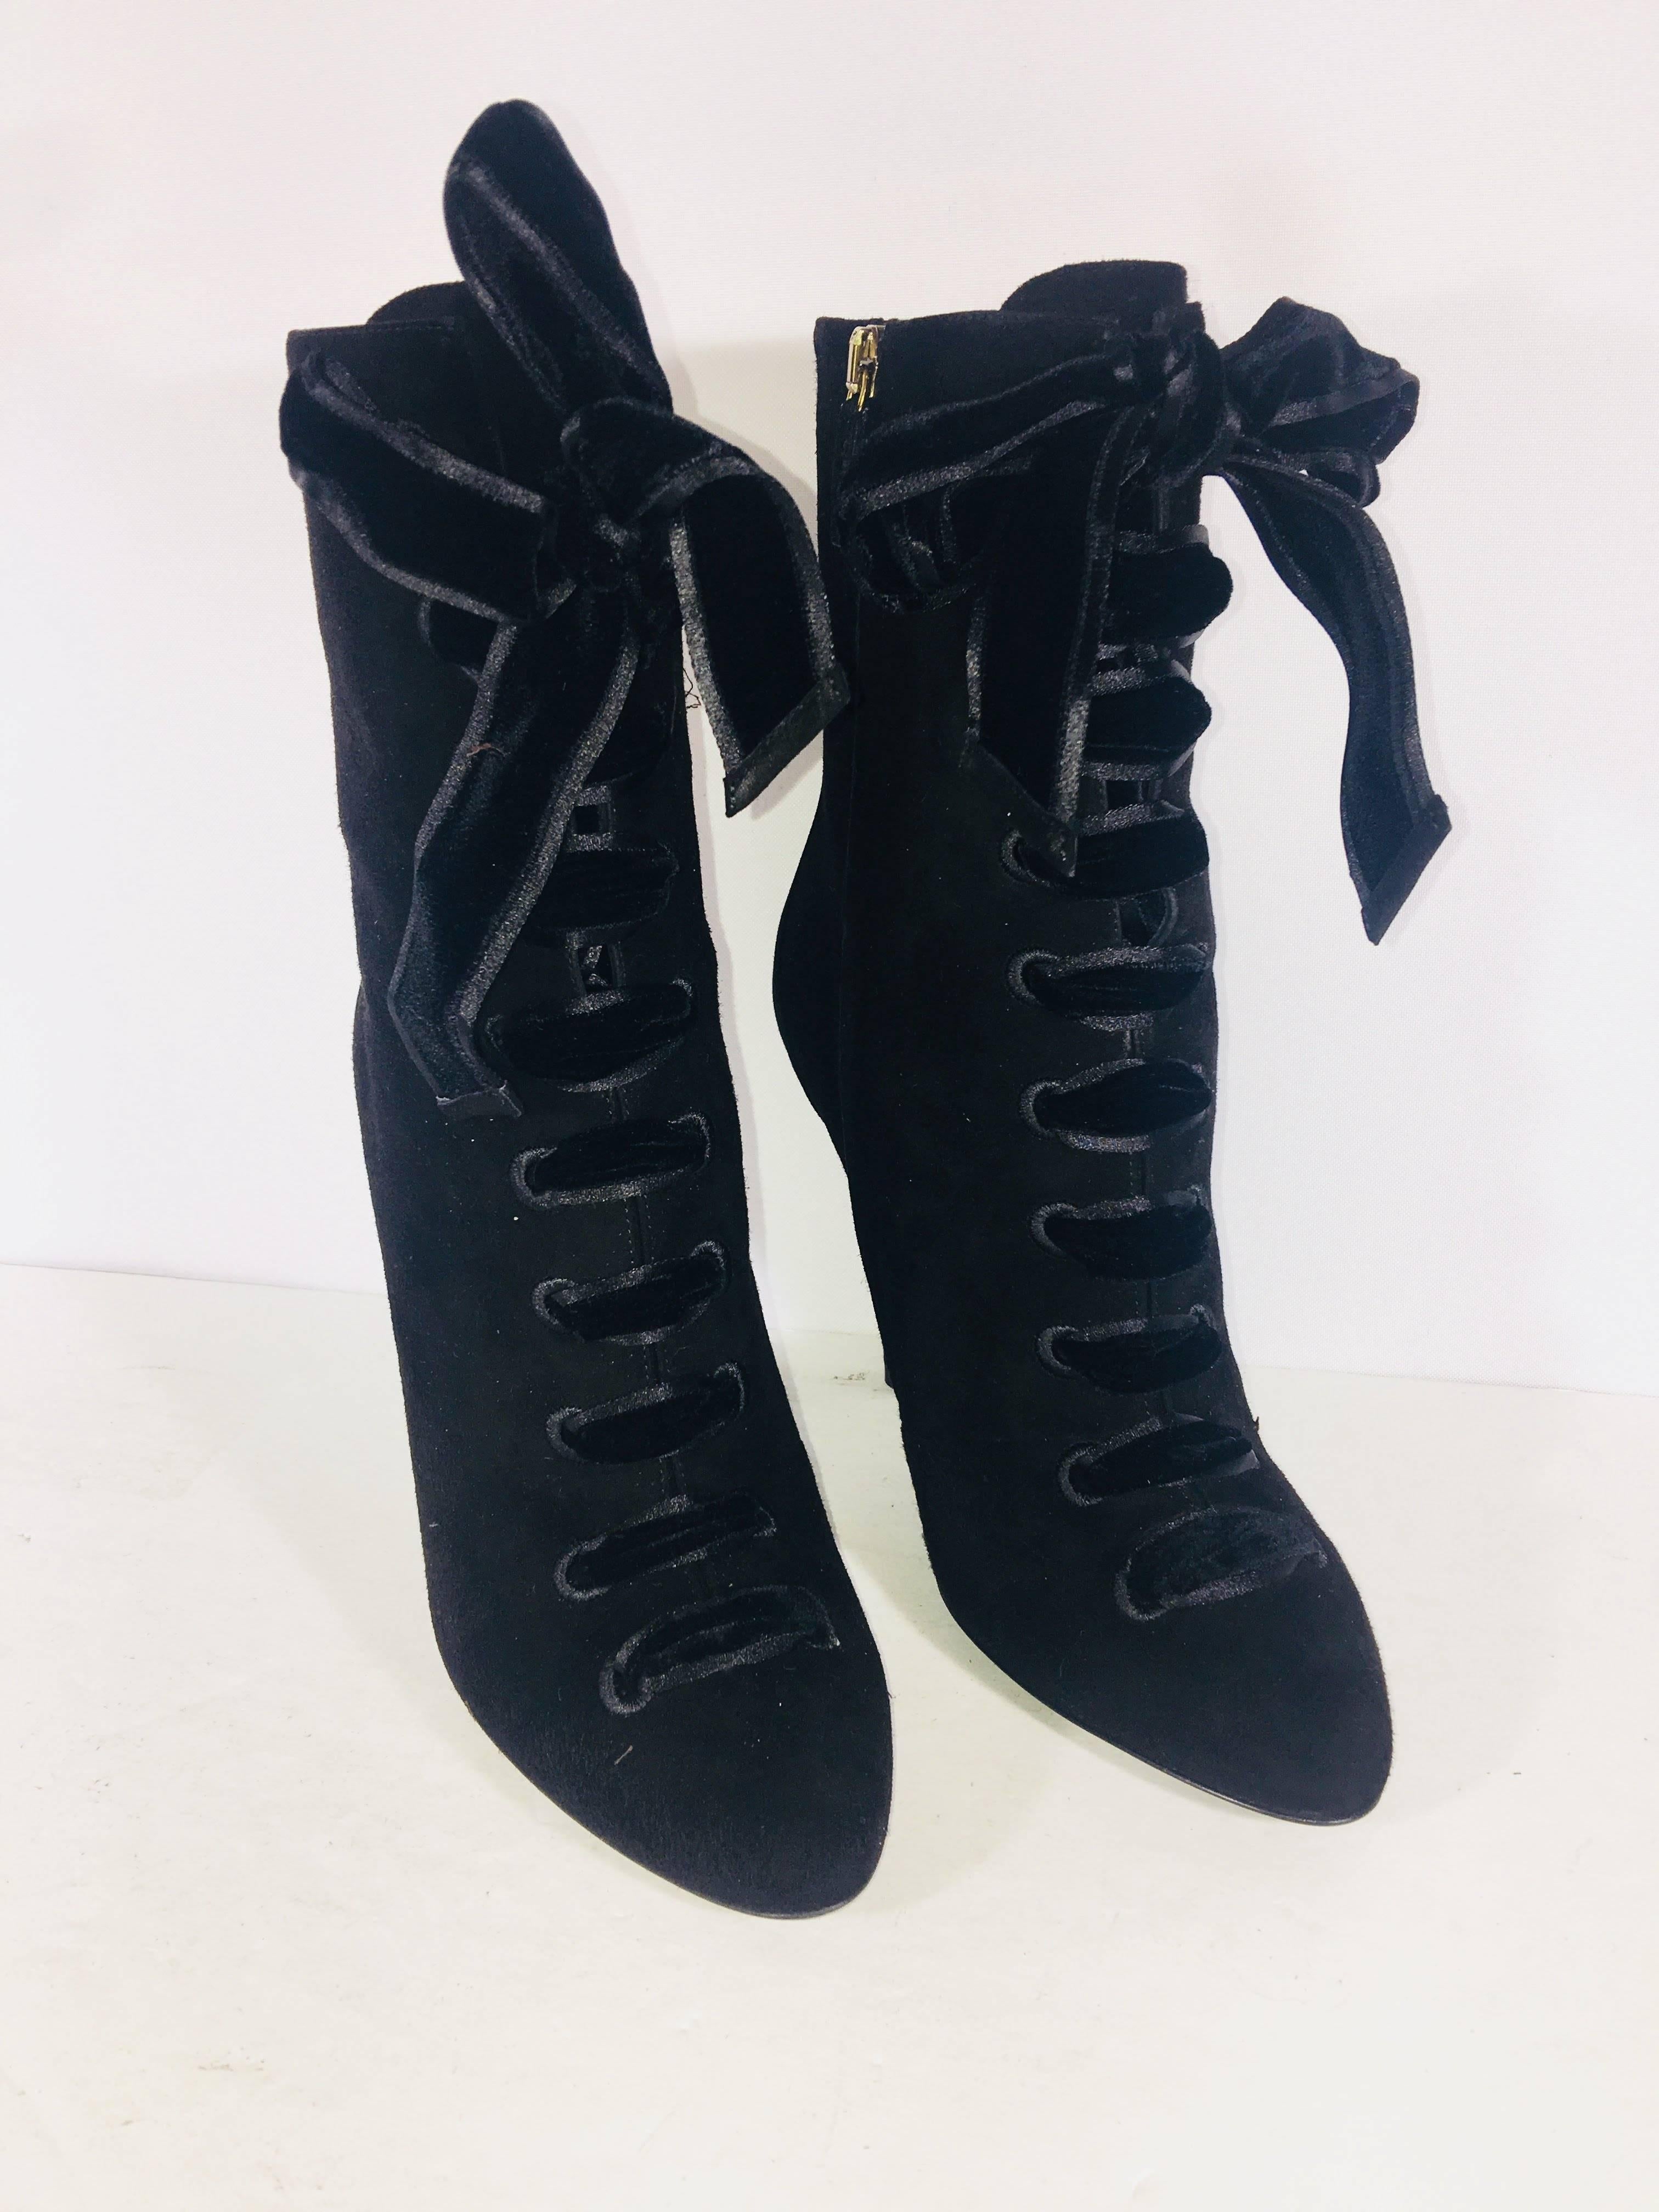 Gucci Velvet Lace Up Ankle Boots with Medium Stiletto Heel.